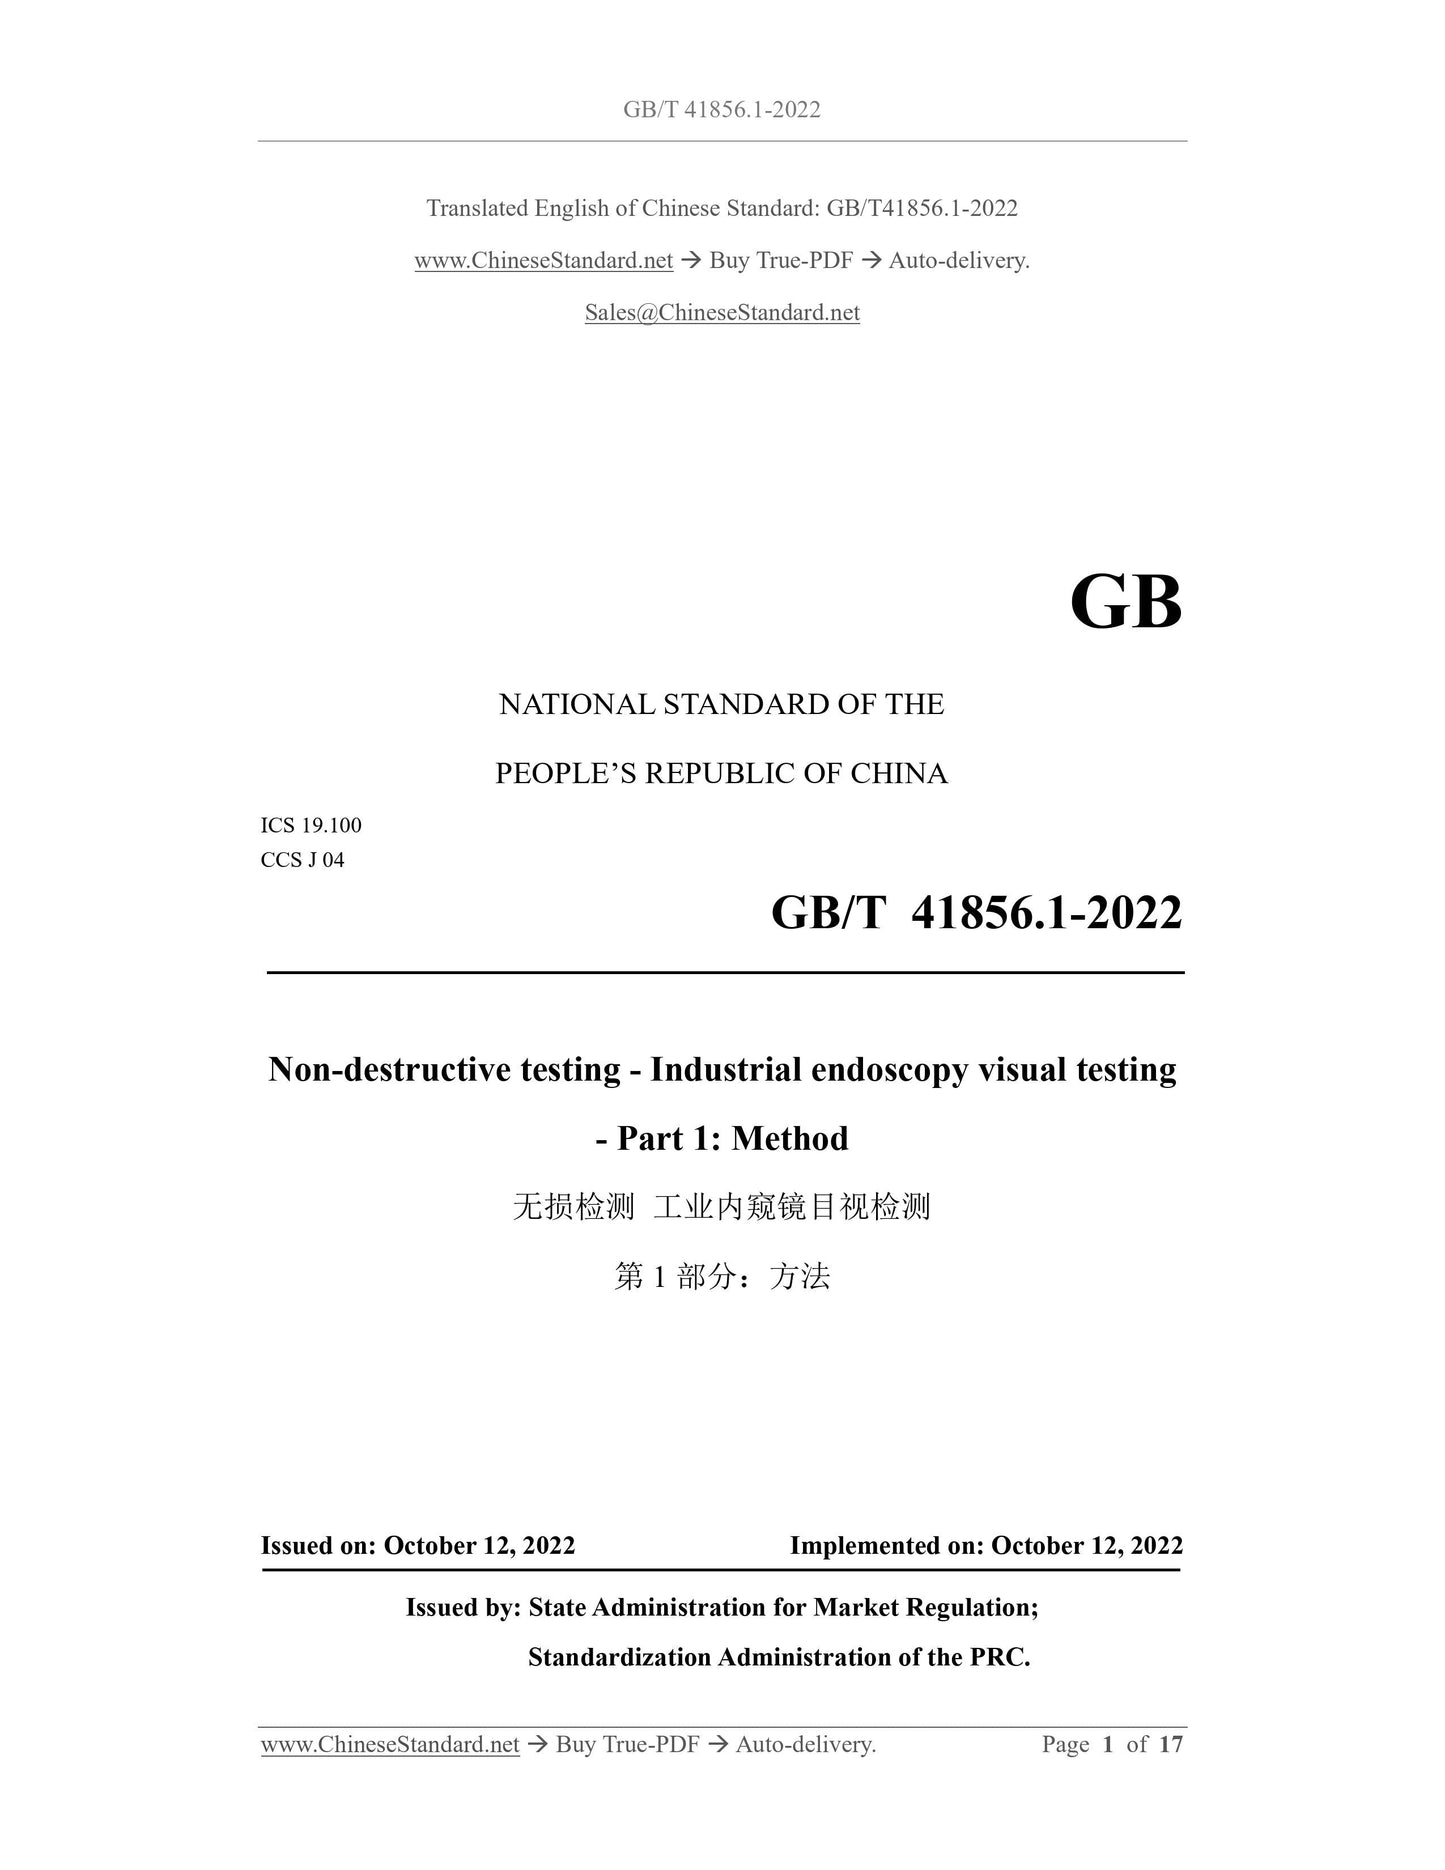 GB/T 41856.1-2022 Page 1